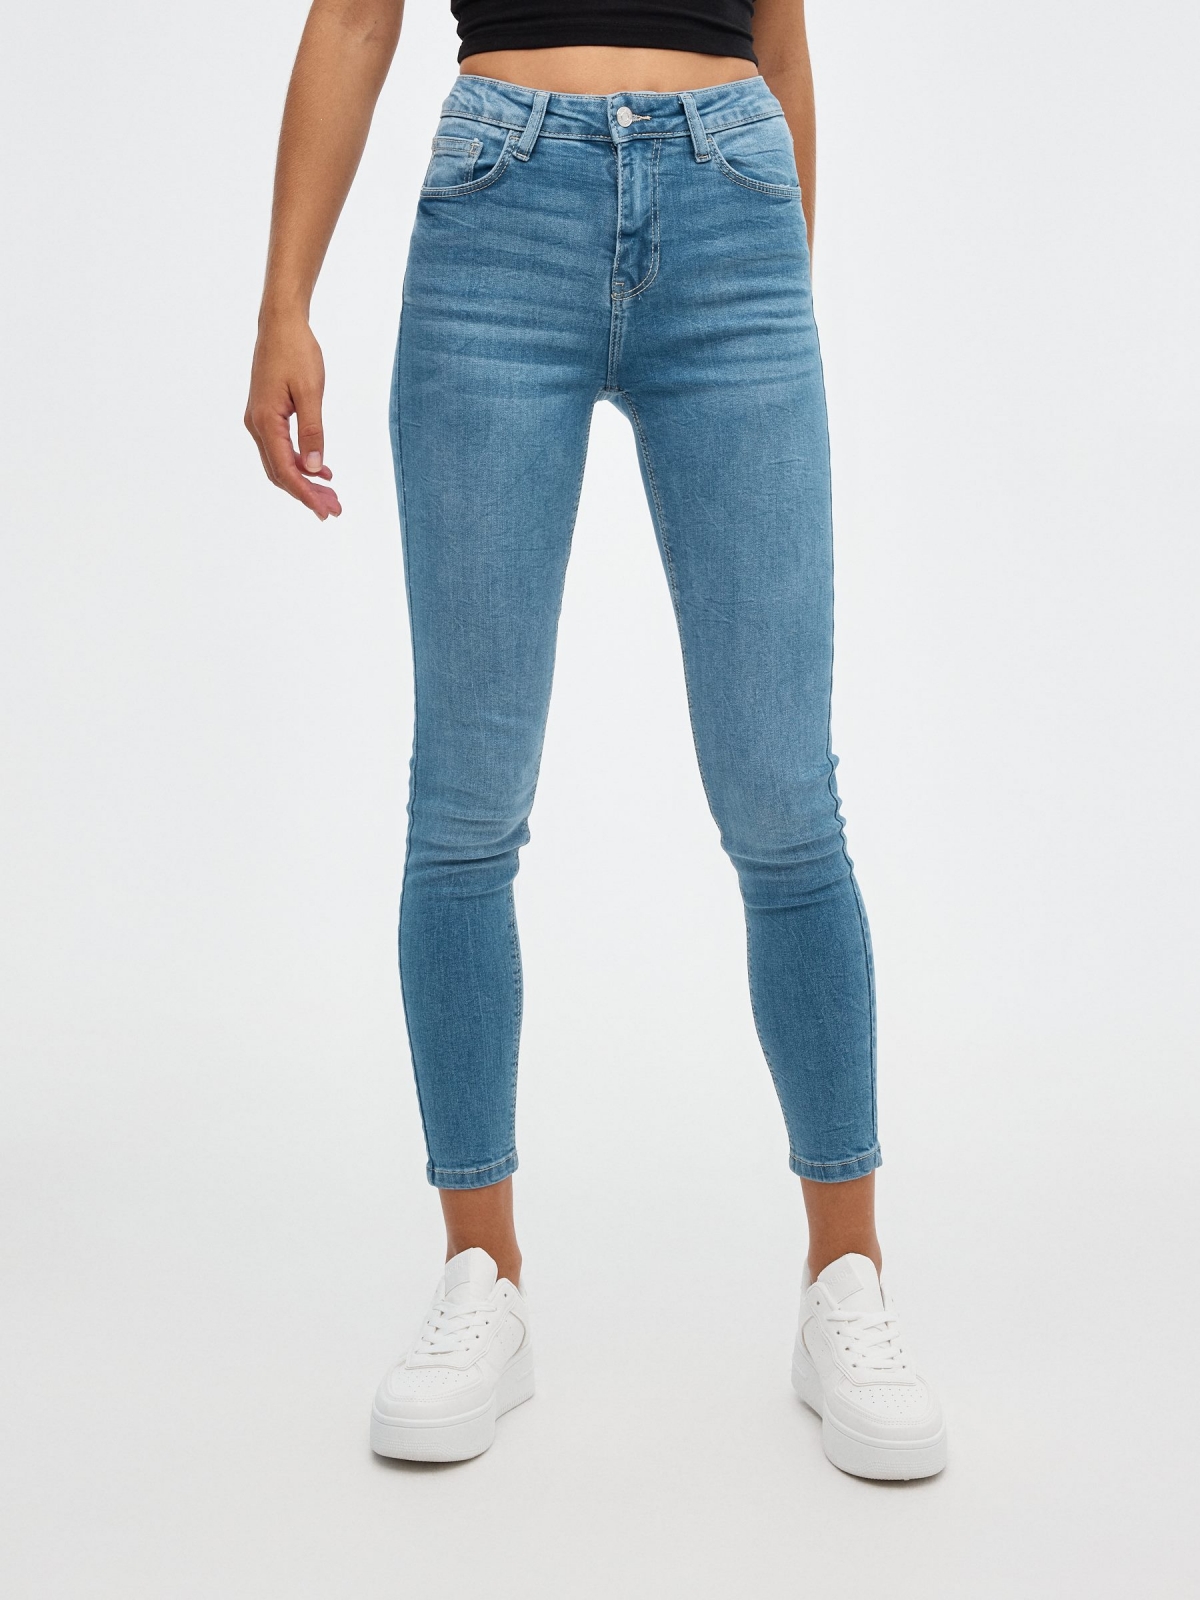 Mid-rise skinny jeans blue middle front view